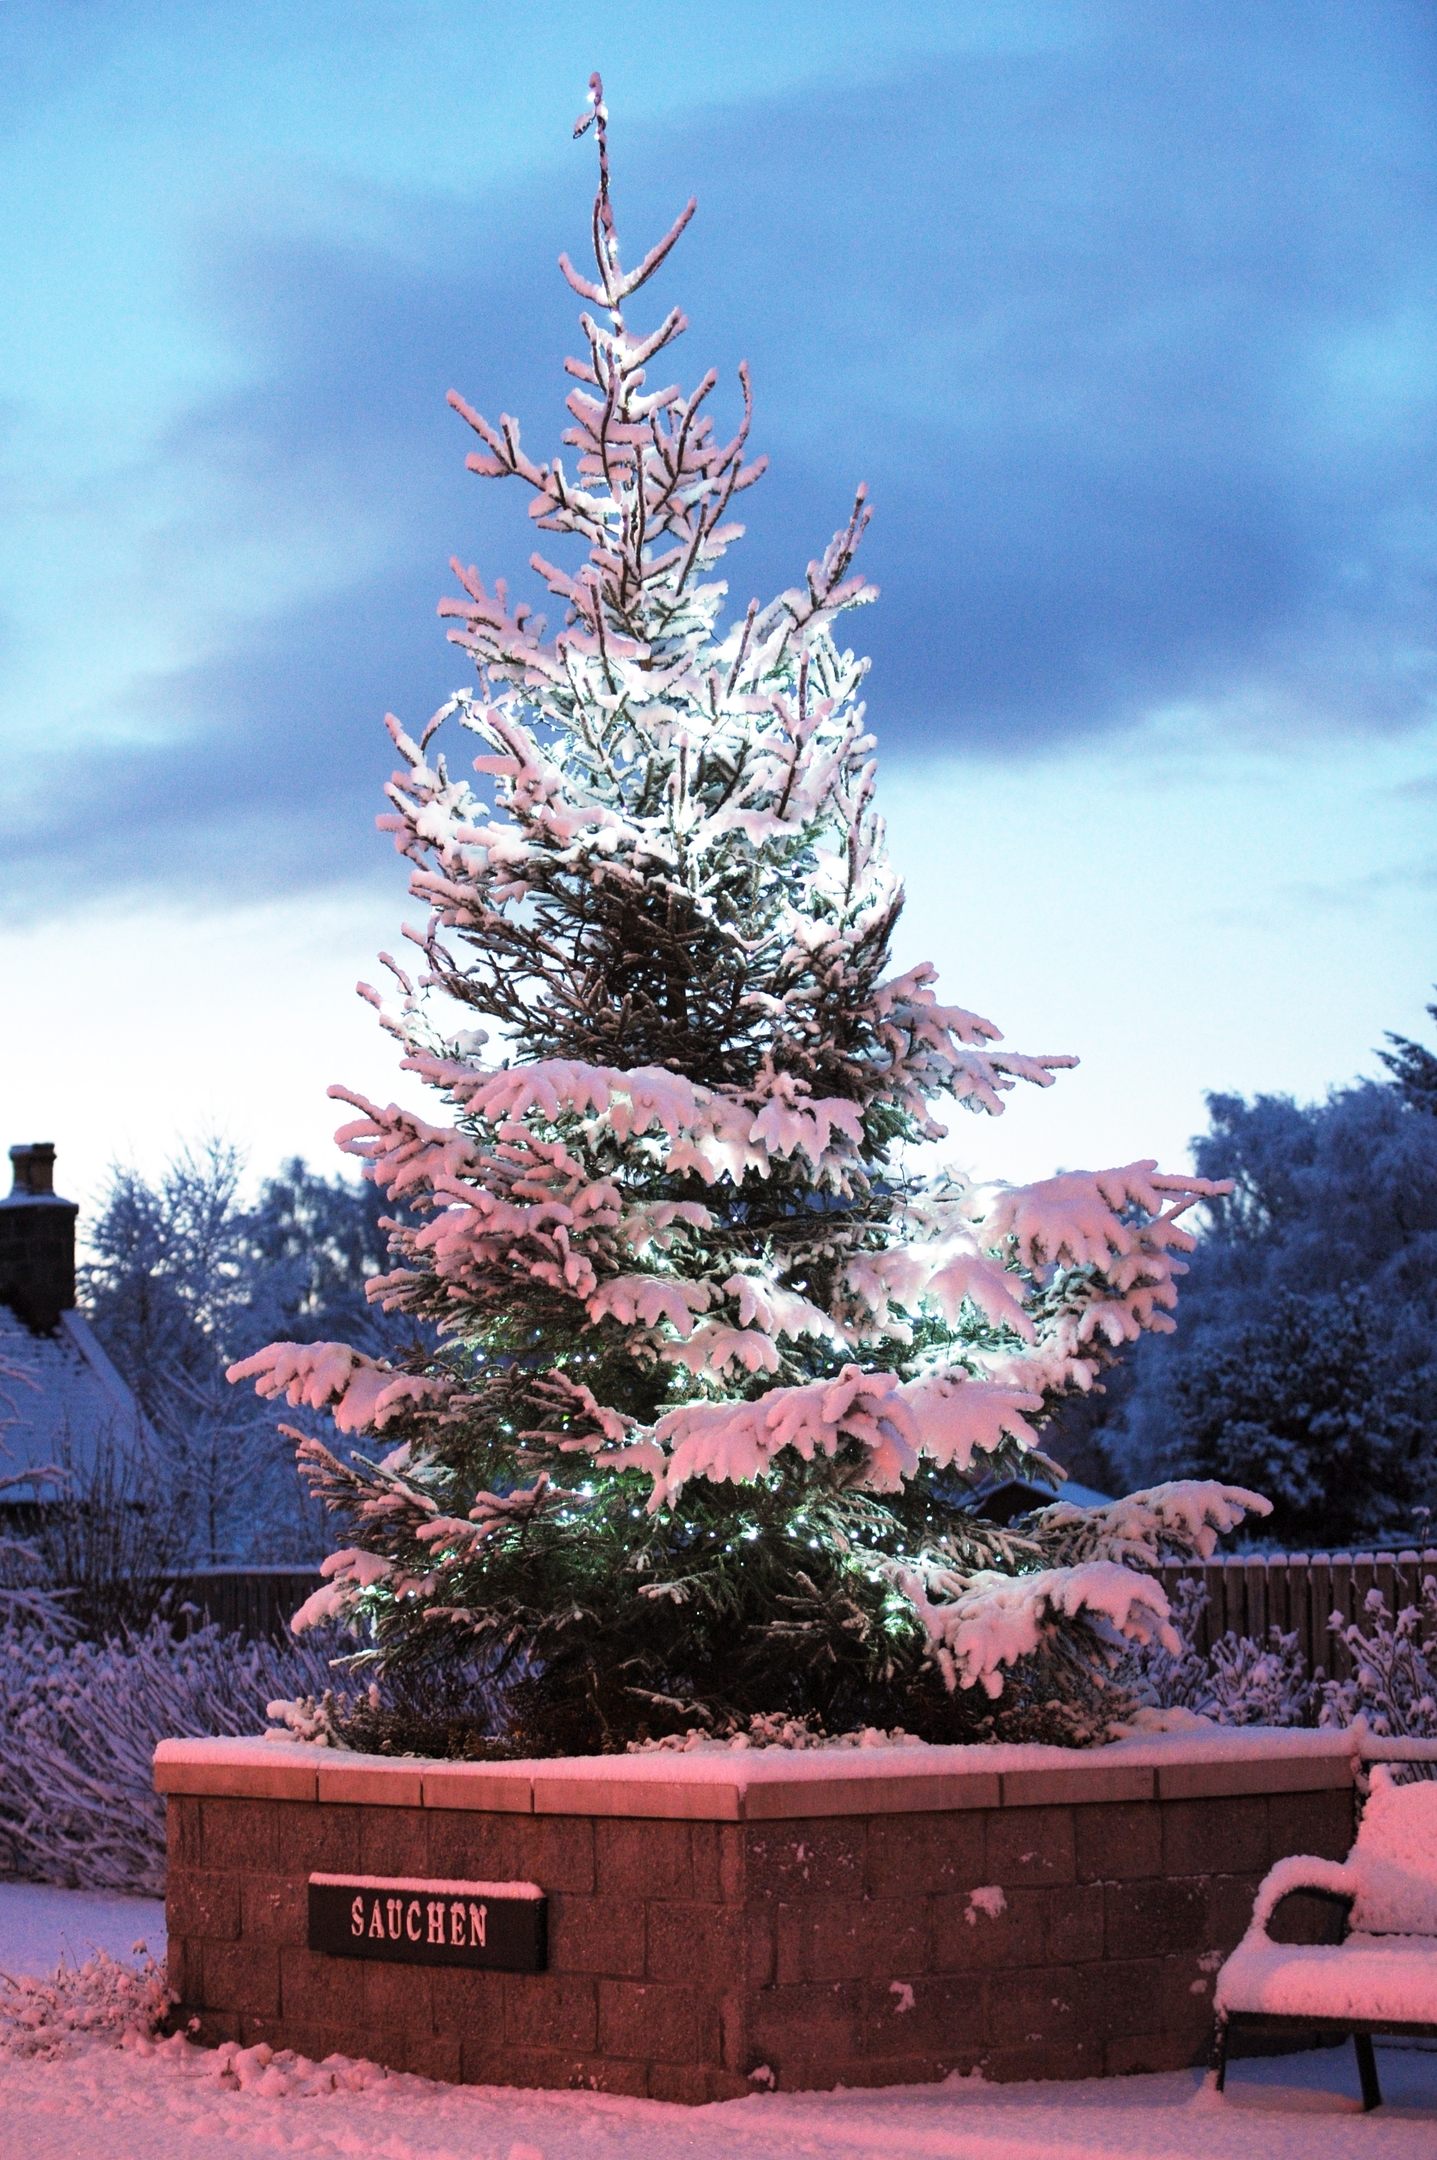 Could we see plenty of north-east Christmas trees covered in snow? 